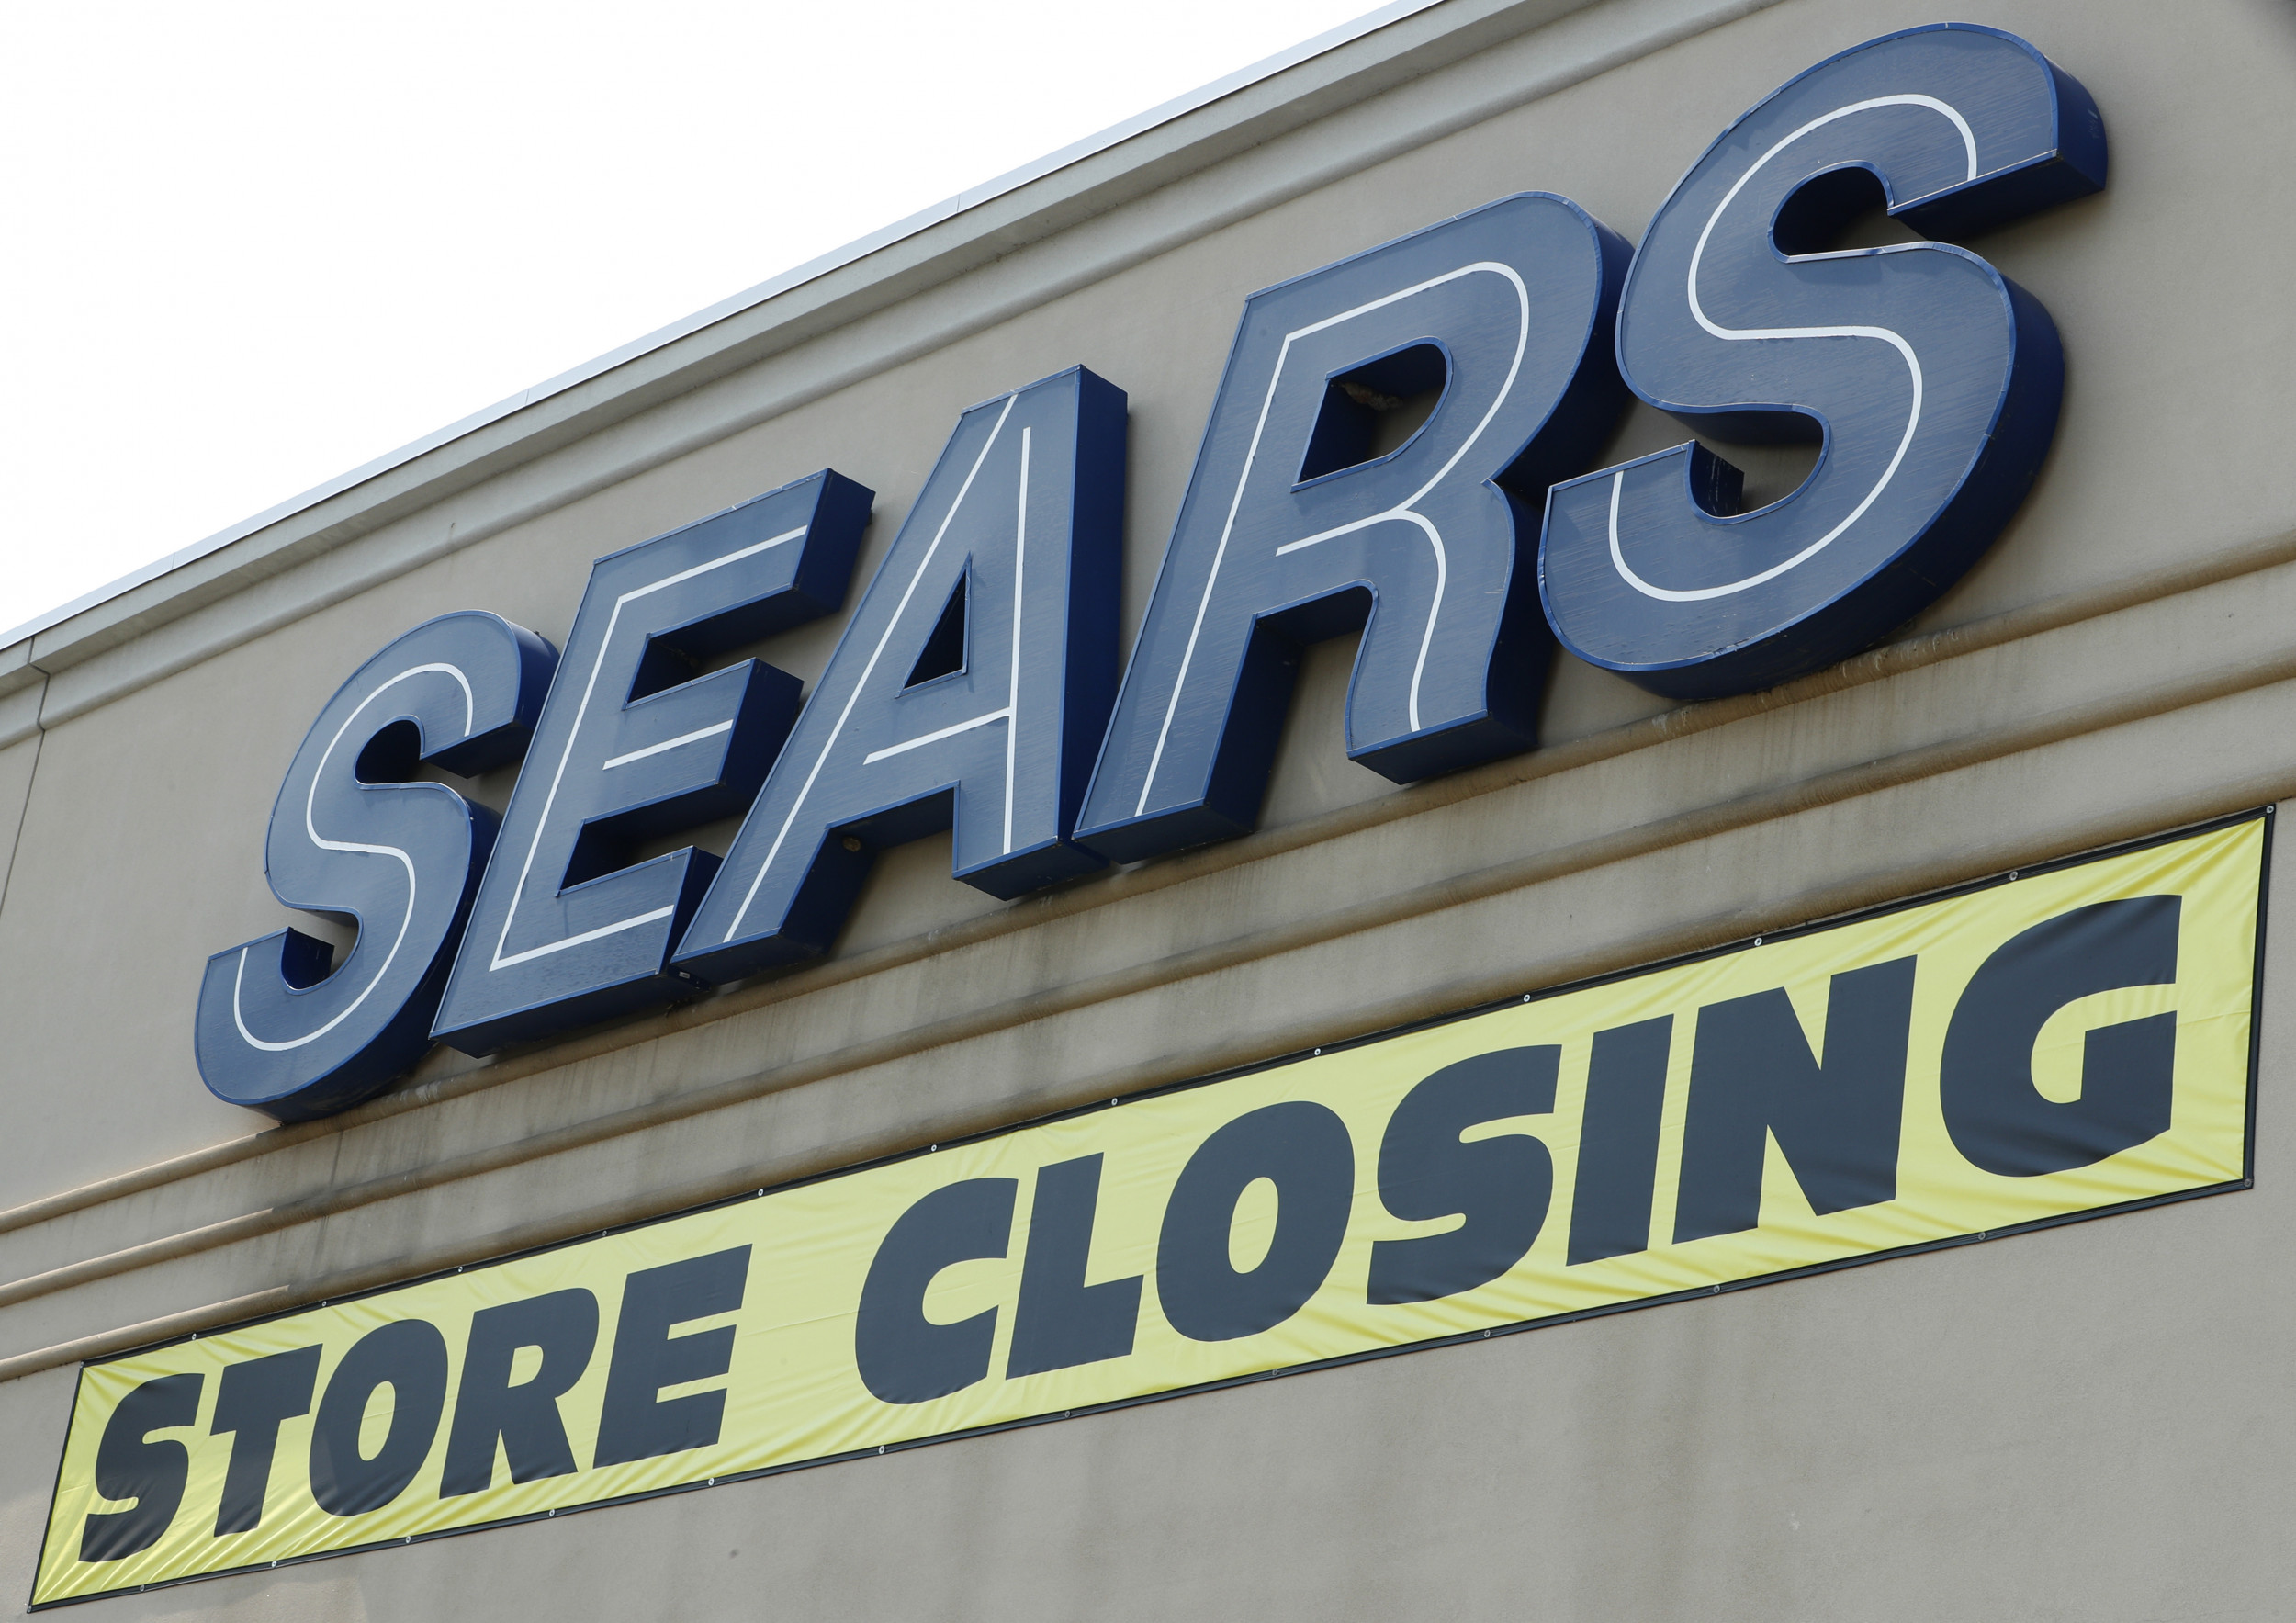 Kmart And Sears Closures When Will They Close How Many Stores